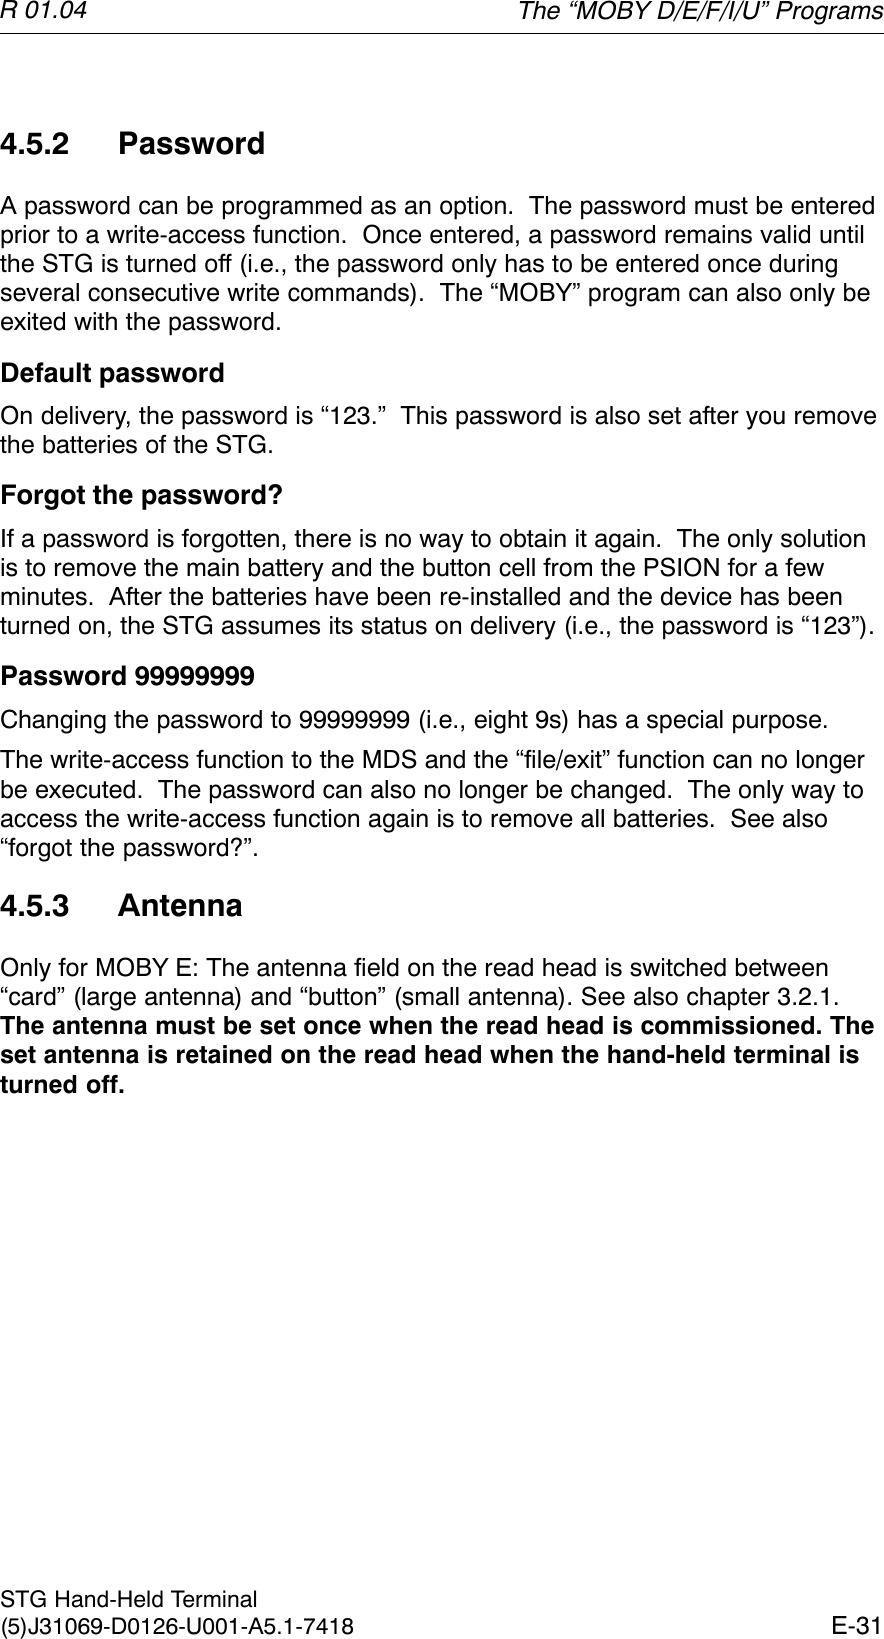 R 01.04E-31STG Hand-Held Terminal(5)J31069-D0126-U001-A5.1-74184.5.2 PasswordA password can be programmed as an option.  The password must be enteredprior to a write-access function.  Once entered, a password remains valid untilthe STG is turned off (i.e., the password only has to be entered once duringseveral consecutive write commands).  The “MOBY” program can also only beexited with the password.Default passwordOn delivery, the password is “123.”  This password is also set after you removethe batteries of the STG.Forgot the password?If a password is forgotten, there is no way to obtain it again.  The only solutionis to remove the main battery and the button cell from the PSION for a fewminutes.  After the batteries have been re-installed and the device has beenturned on, the STG assumes its status on delivery (i.e., the password is “123”).Password 99999999Changing the password to 99999999 (i.e., eight 9s) has a special purpose.The write-access function to the MDS and the “file/exit” function can no longerbe executed.  The password can also no longer be changed.  The only way toaccess the write-access function again is to remove all batteries.  See also“forgot the password?”.4.5.3 AntennaOnly for MOBY E: The antenna field on the read head is switched between“card” (large antenna) and “button” (small antenna). See also chapter 3.2.1.The antenna must be set once when the read head is commissioned. Theset antenna is retained on the read head when the hand-held terminal isturned off.The “MOBY D/E/F/I/U” Programs